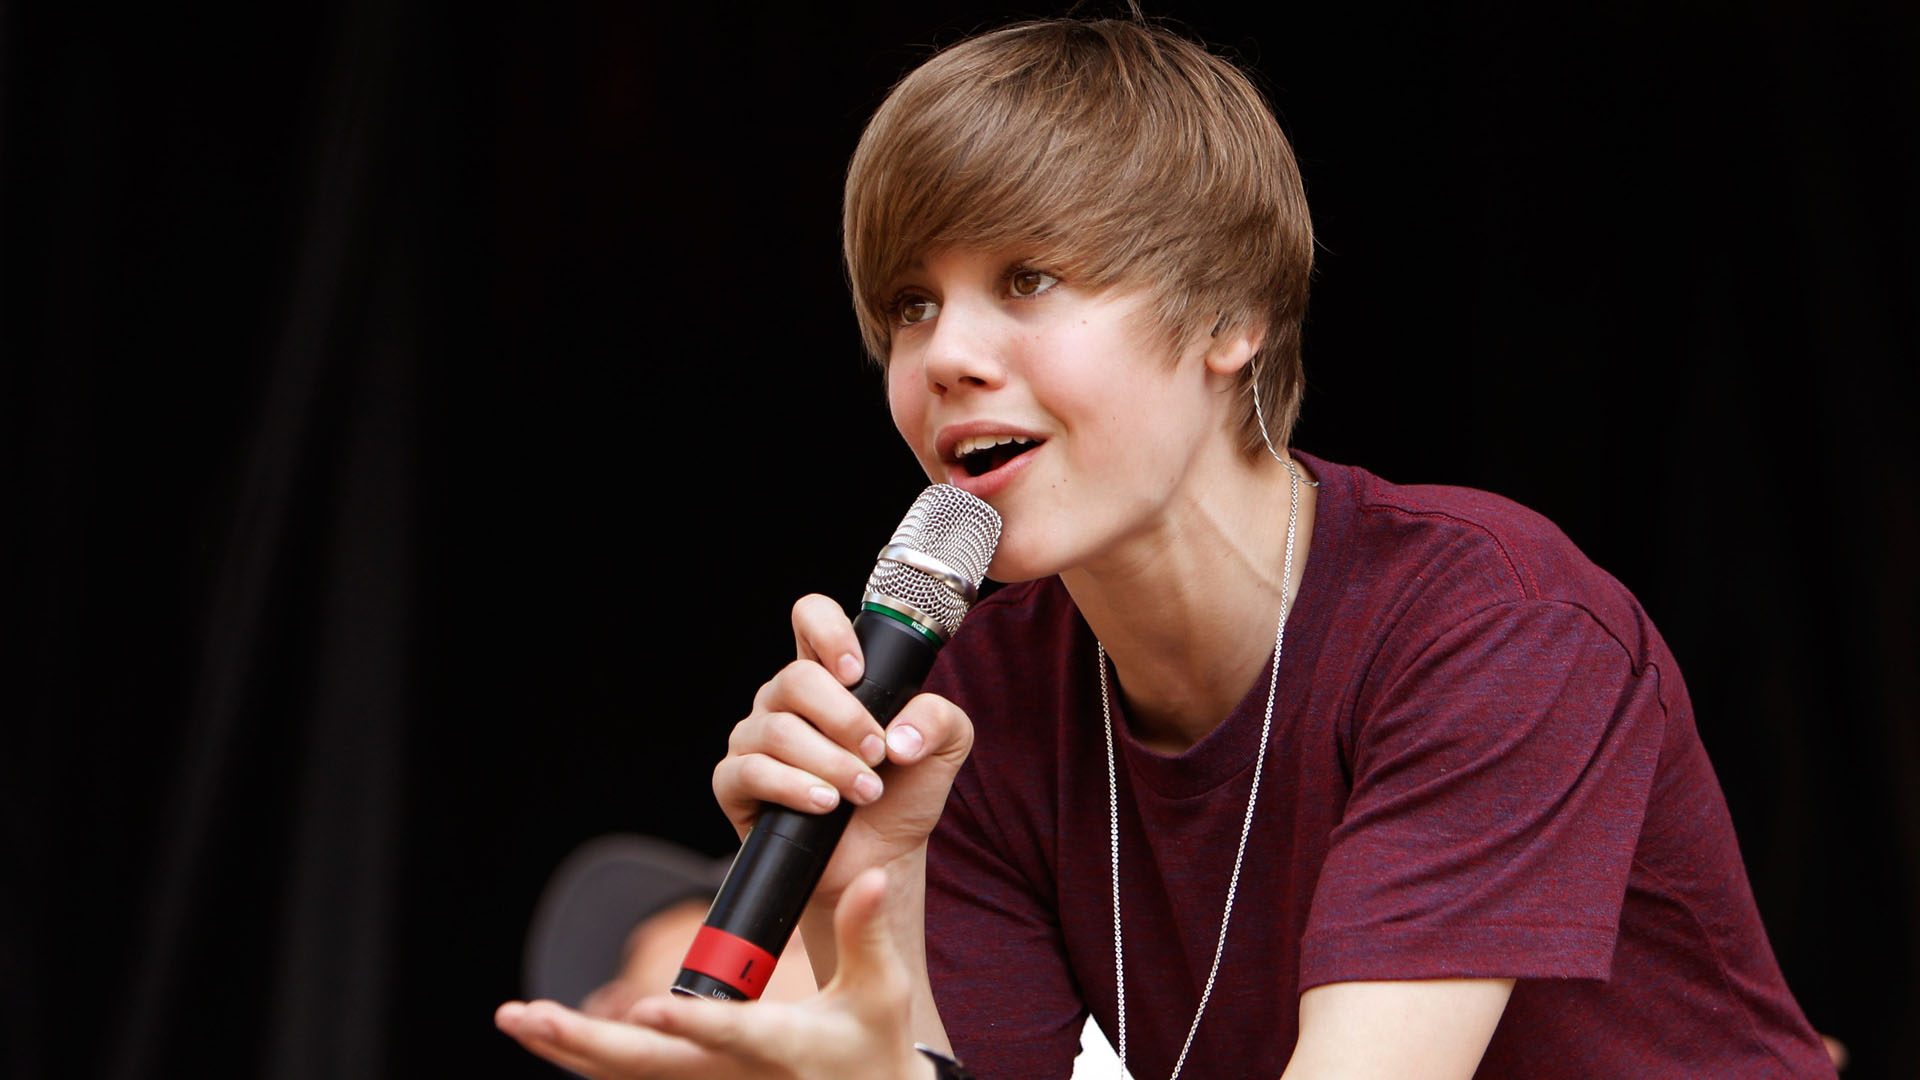  Justin bieber music 2013 hd wallpaper and make this wallpaper for your